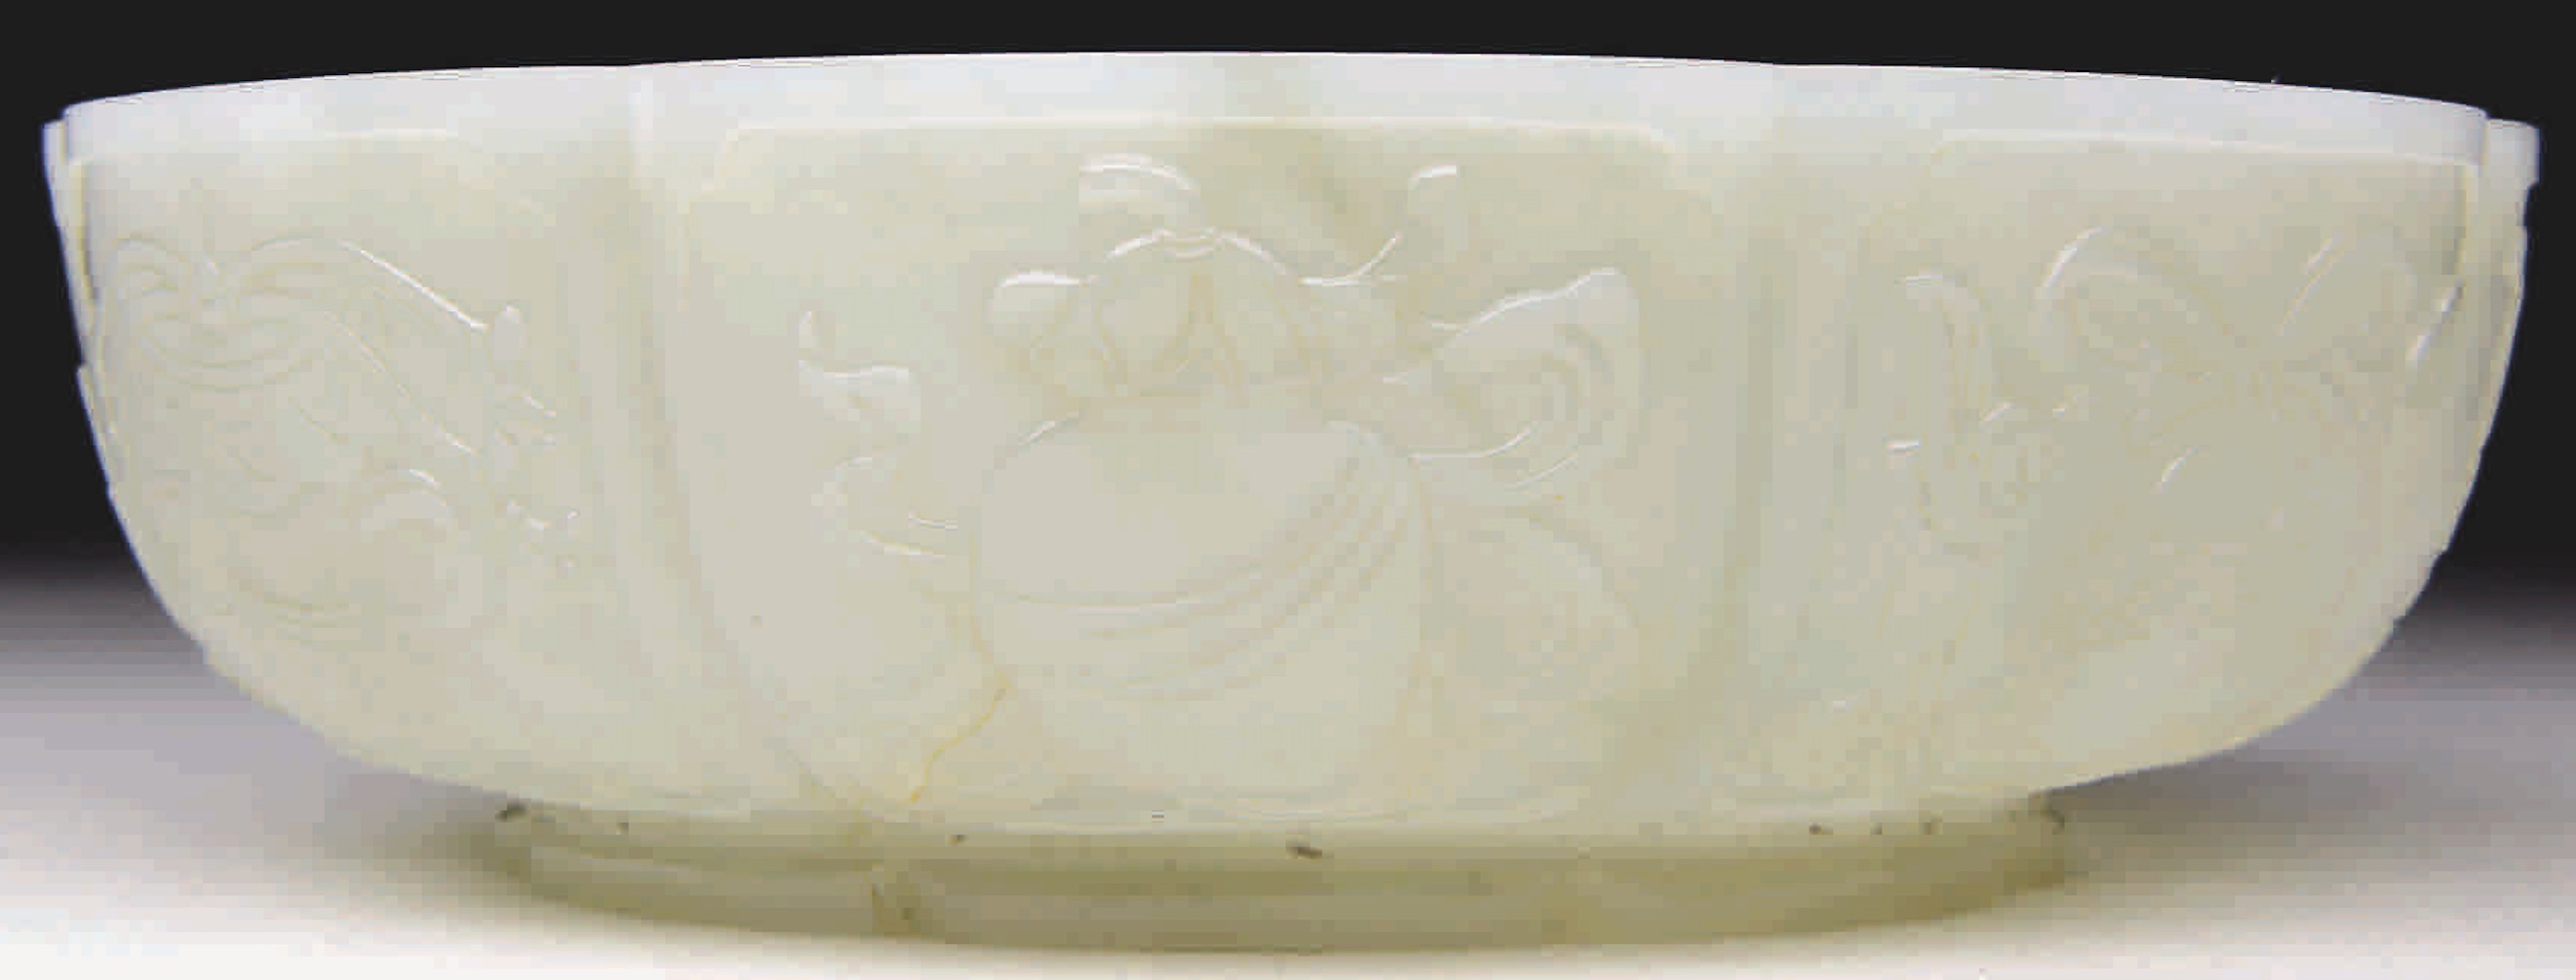 A Fine Carved Jade Shallow Bowl Realized $31,995.